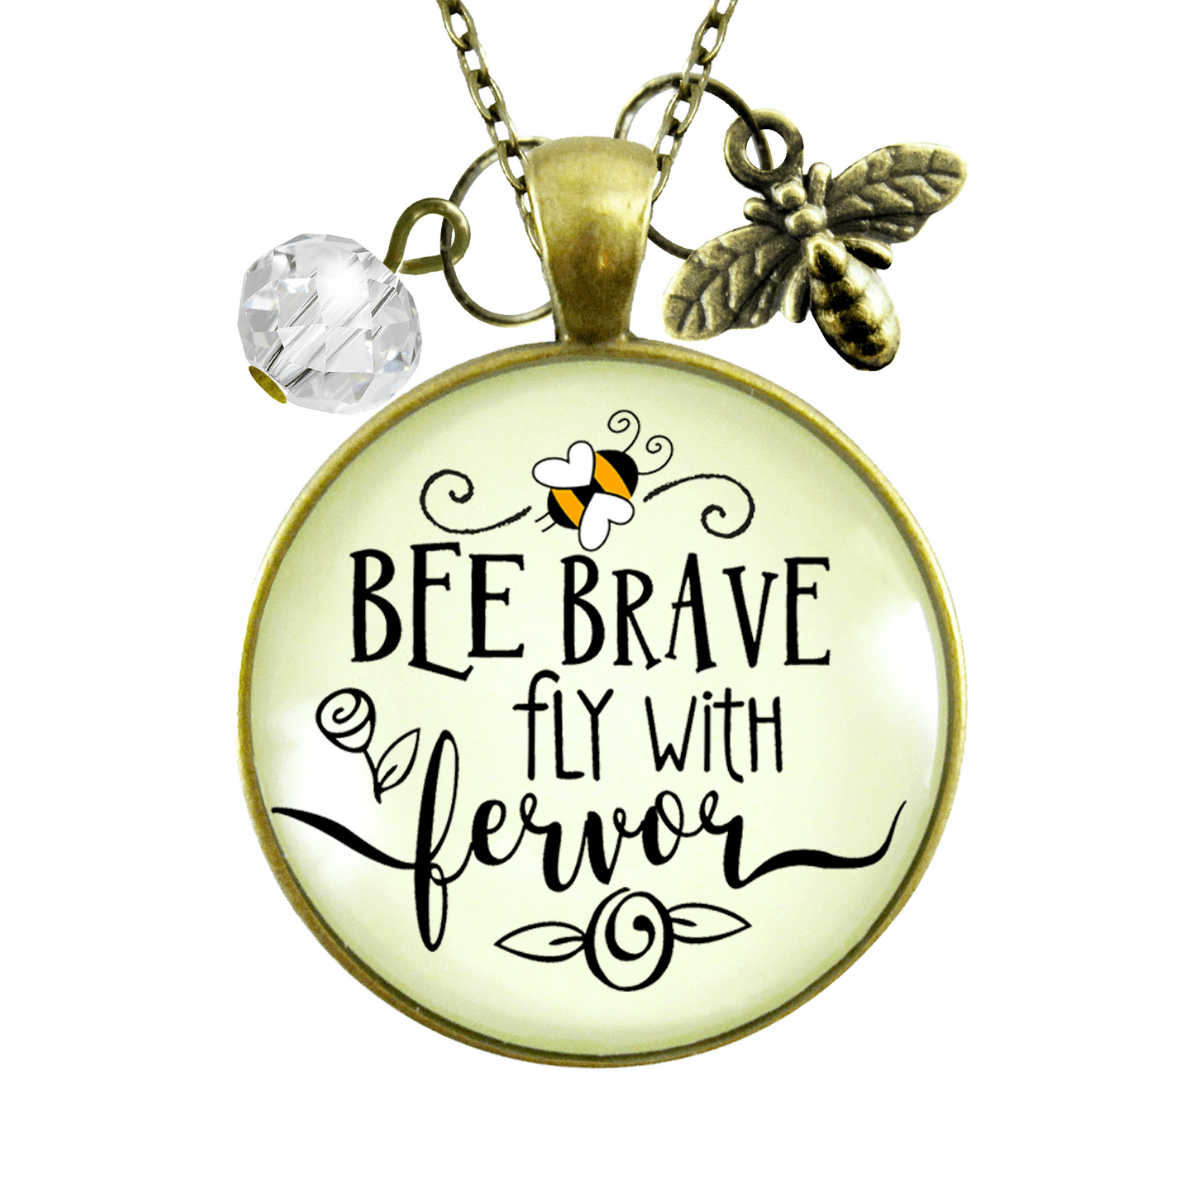 Gutsy Goodness Bee Brave Necklace Fly with Fervor Vintage Jewelry Dainty Bumble Bee - Gutsy Goodness Handmade Jewelry;Bee Brave Necklace Fly With Fervor Vintage Jewelry Dainty Bumble Bee - Gutsy Goodness Handmade Jewelry Gifts